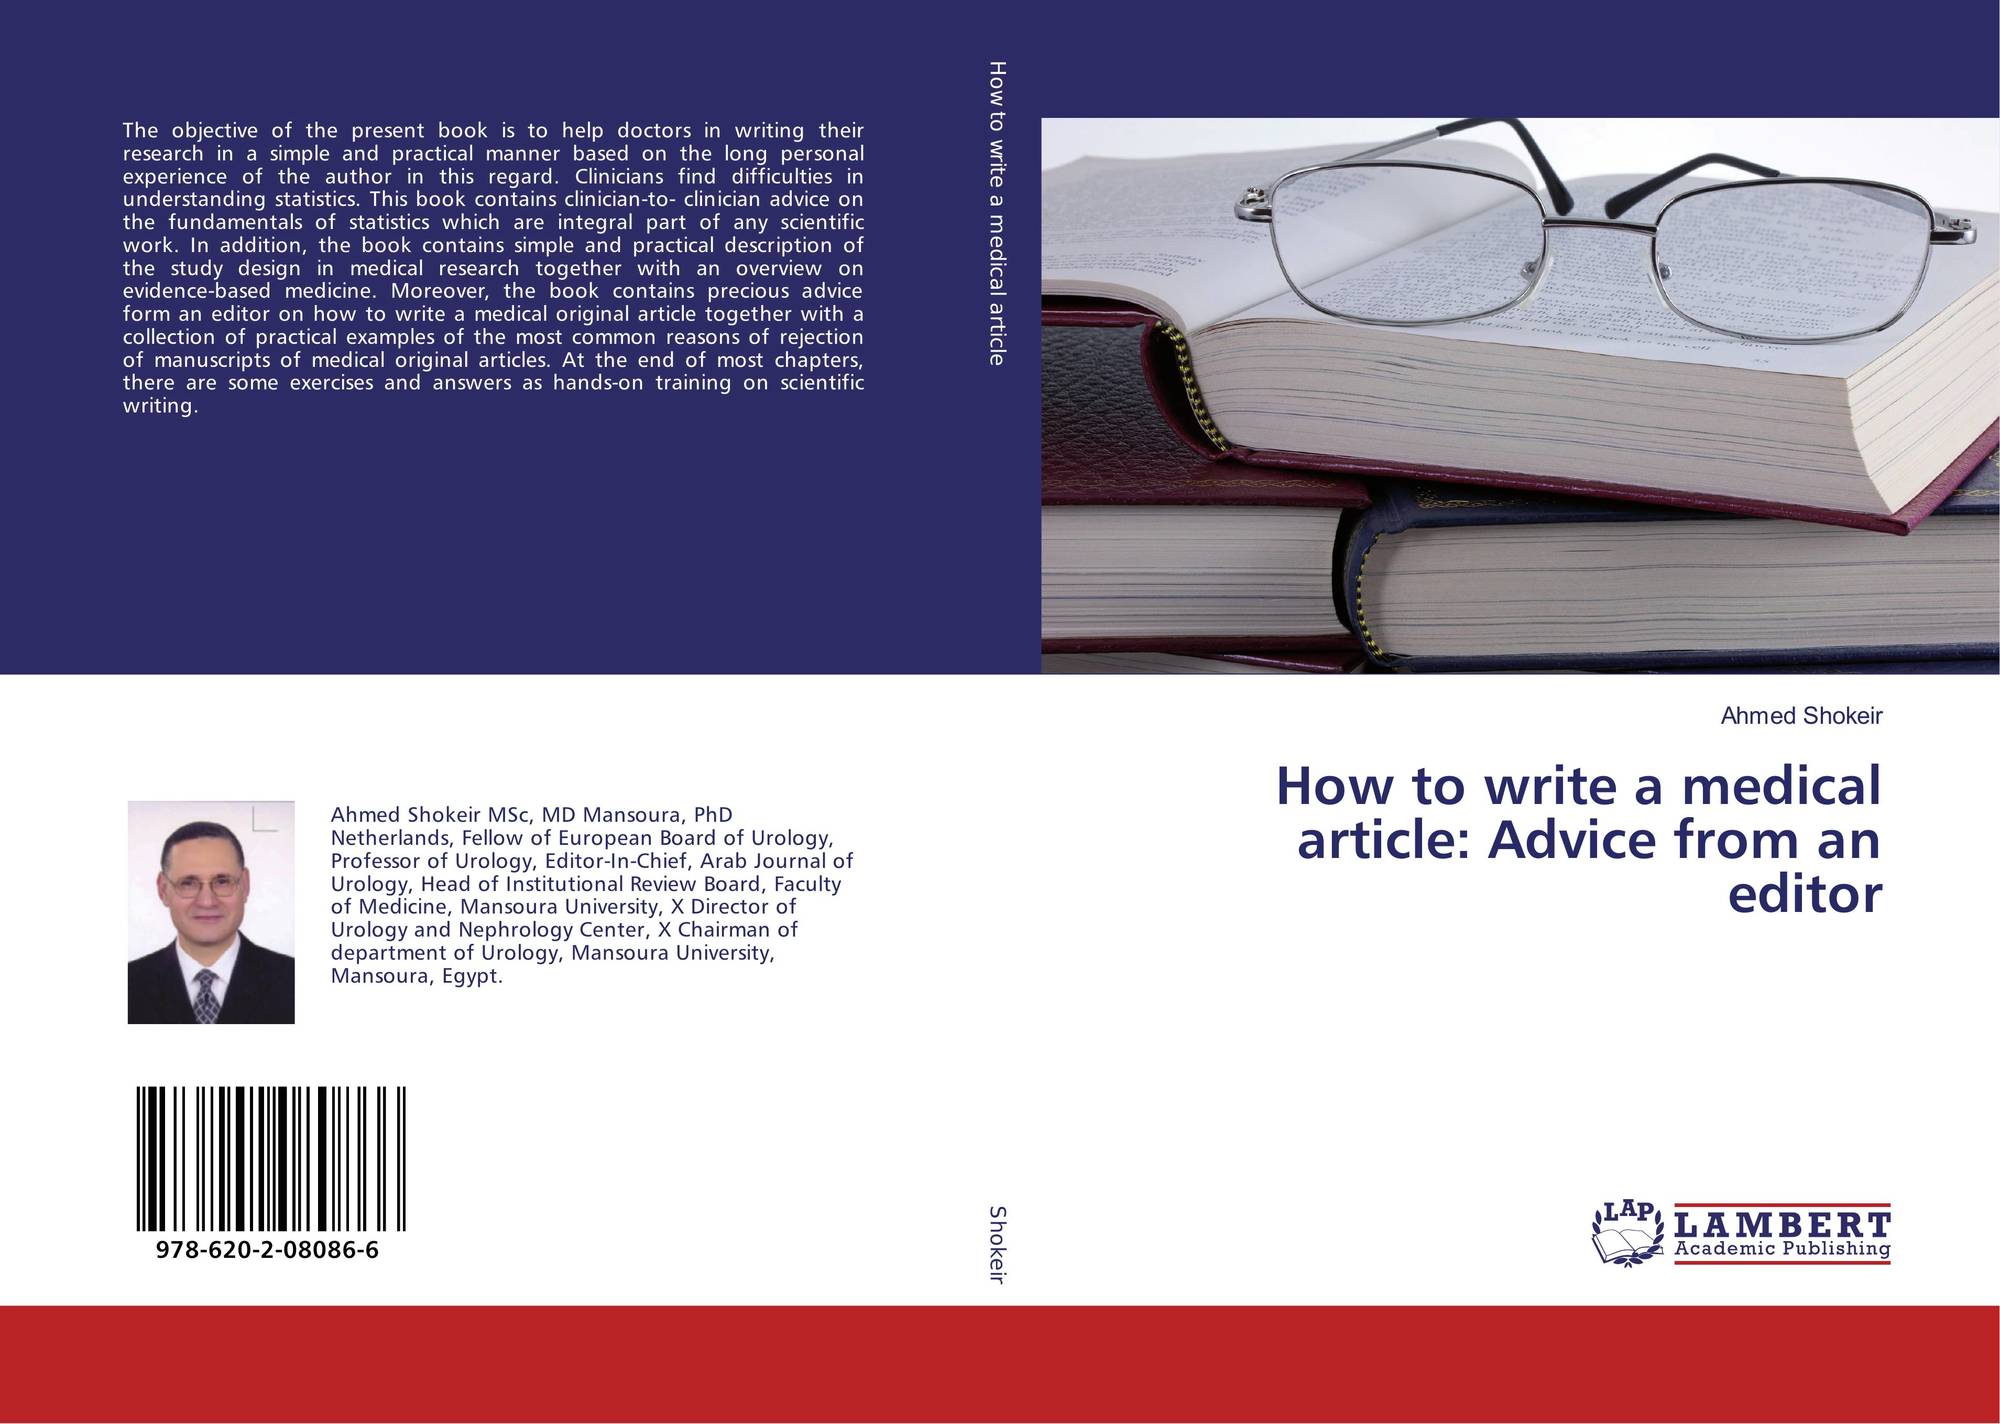 How to write a medical article: Advice from an editor, 244-244-24